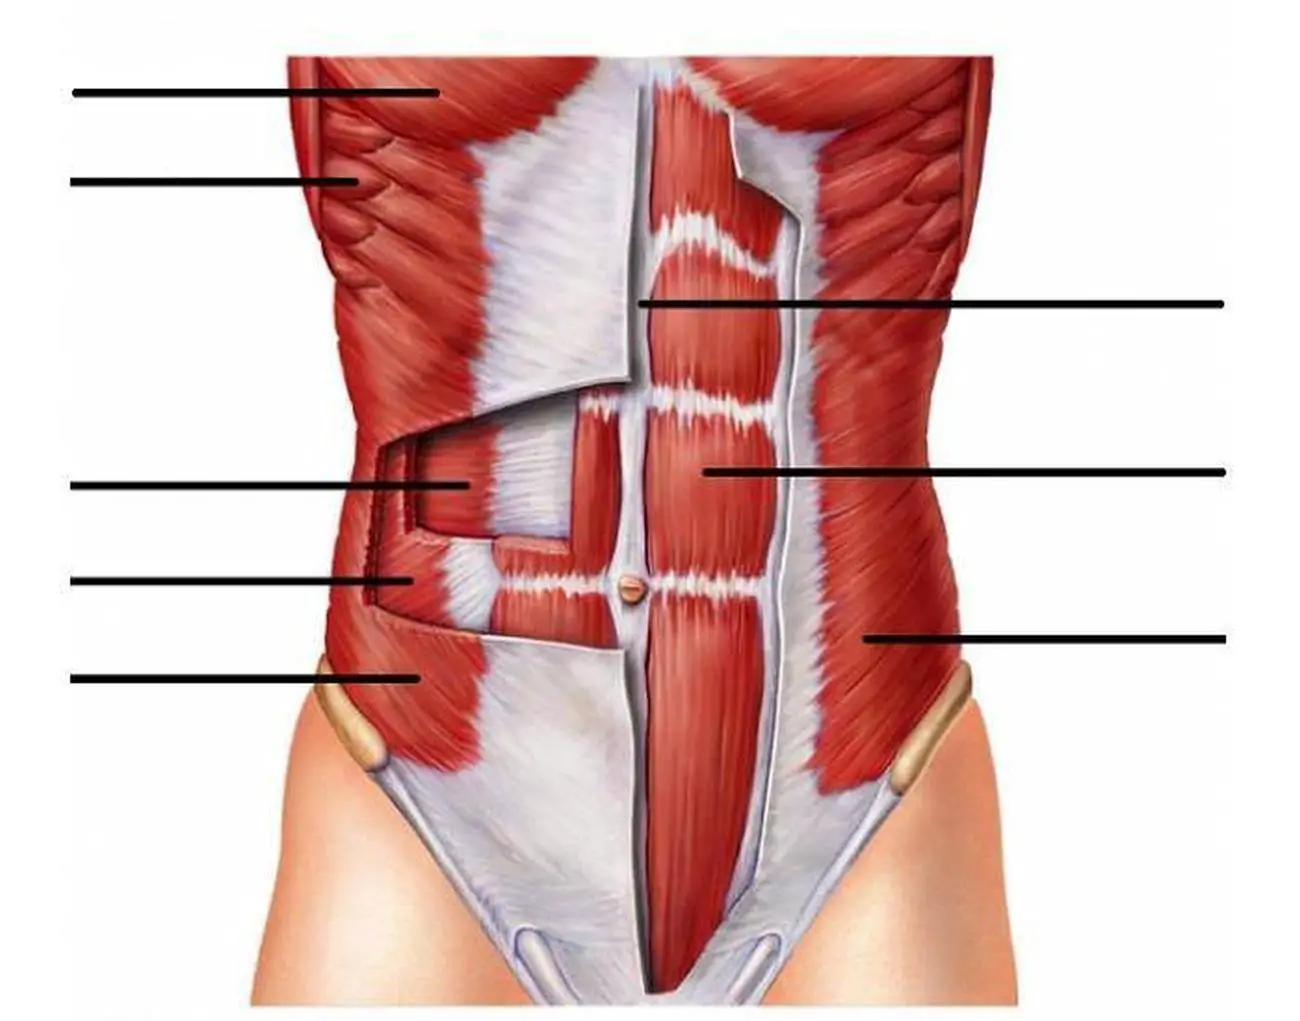 Pictures Of Abdominal Muscles